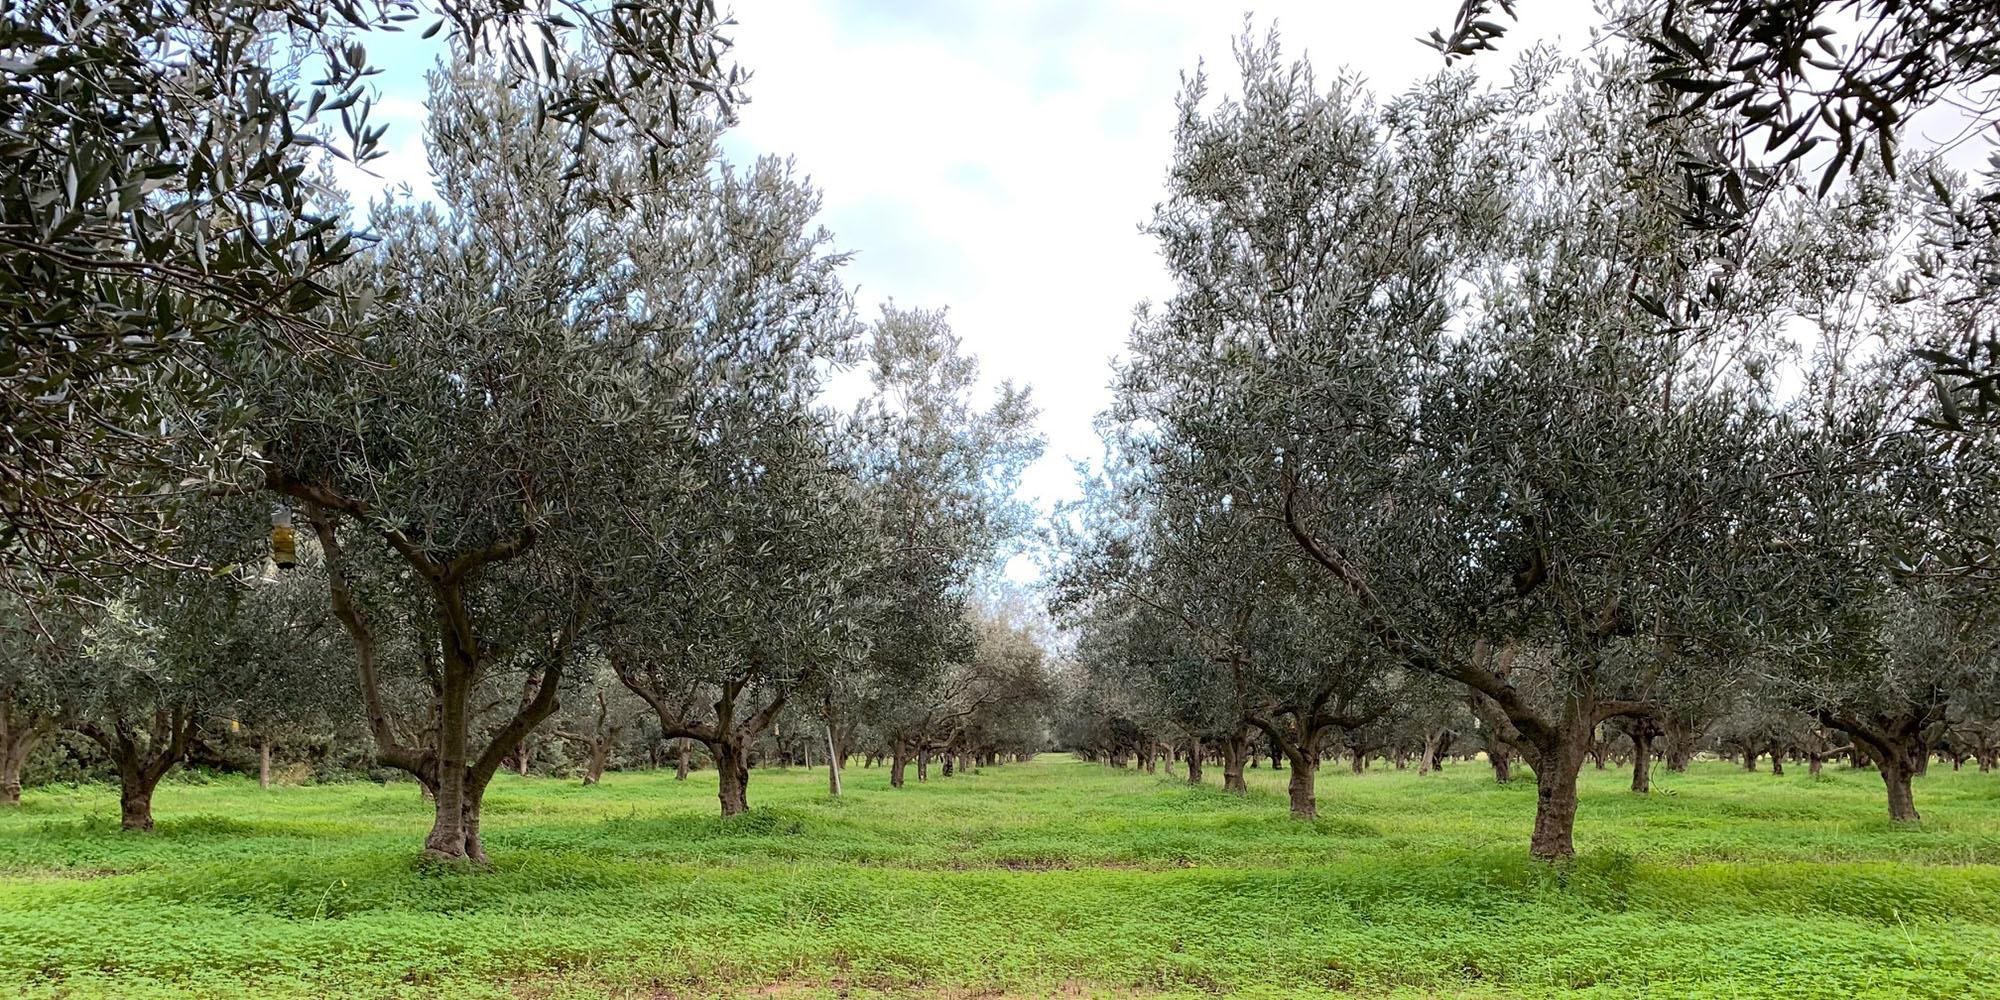 In the Olive Grove